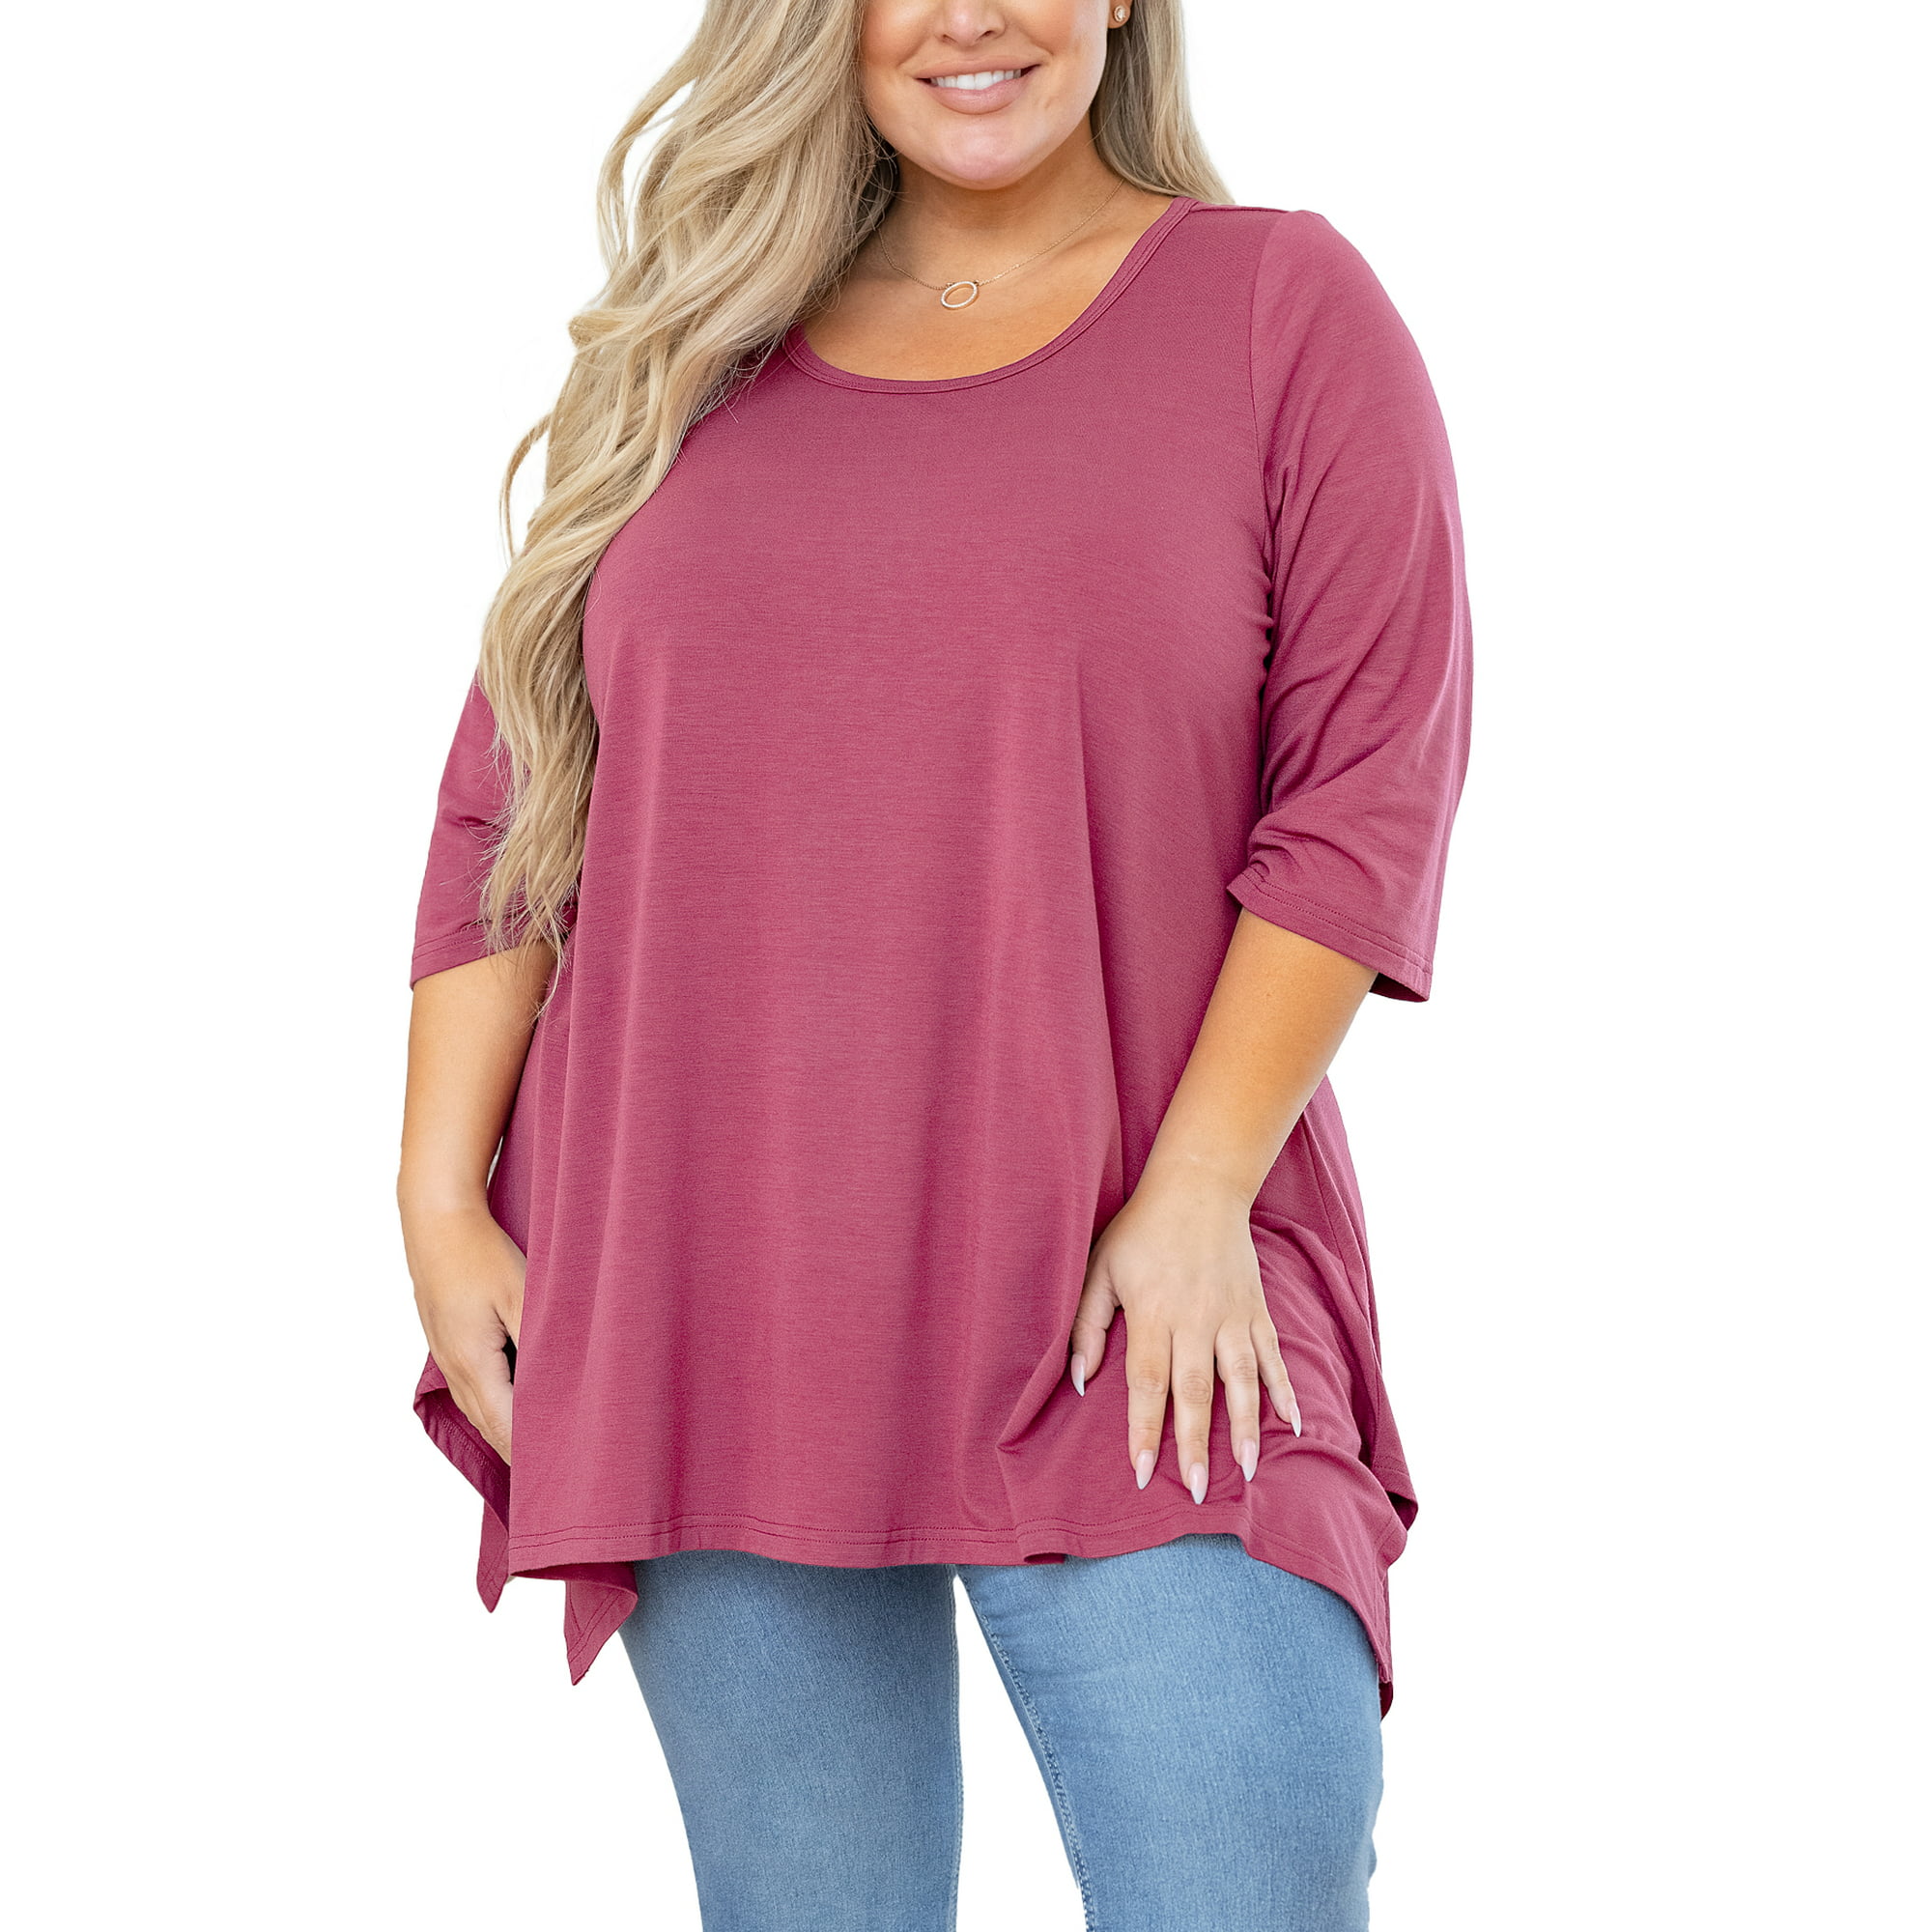 SHOWMALL Plus Size Top 3/4 Sleeve Clothes Purple Red 3X Blouse Swing Tunic Crewneck Loose Shirt for Leggings Walmart.com